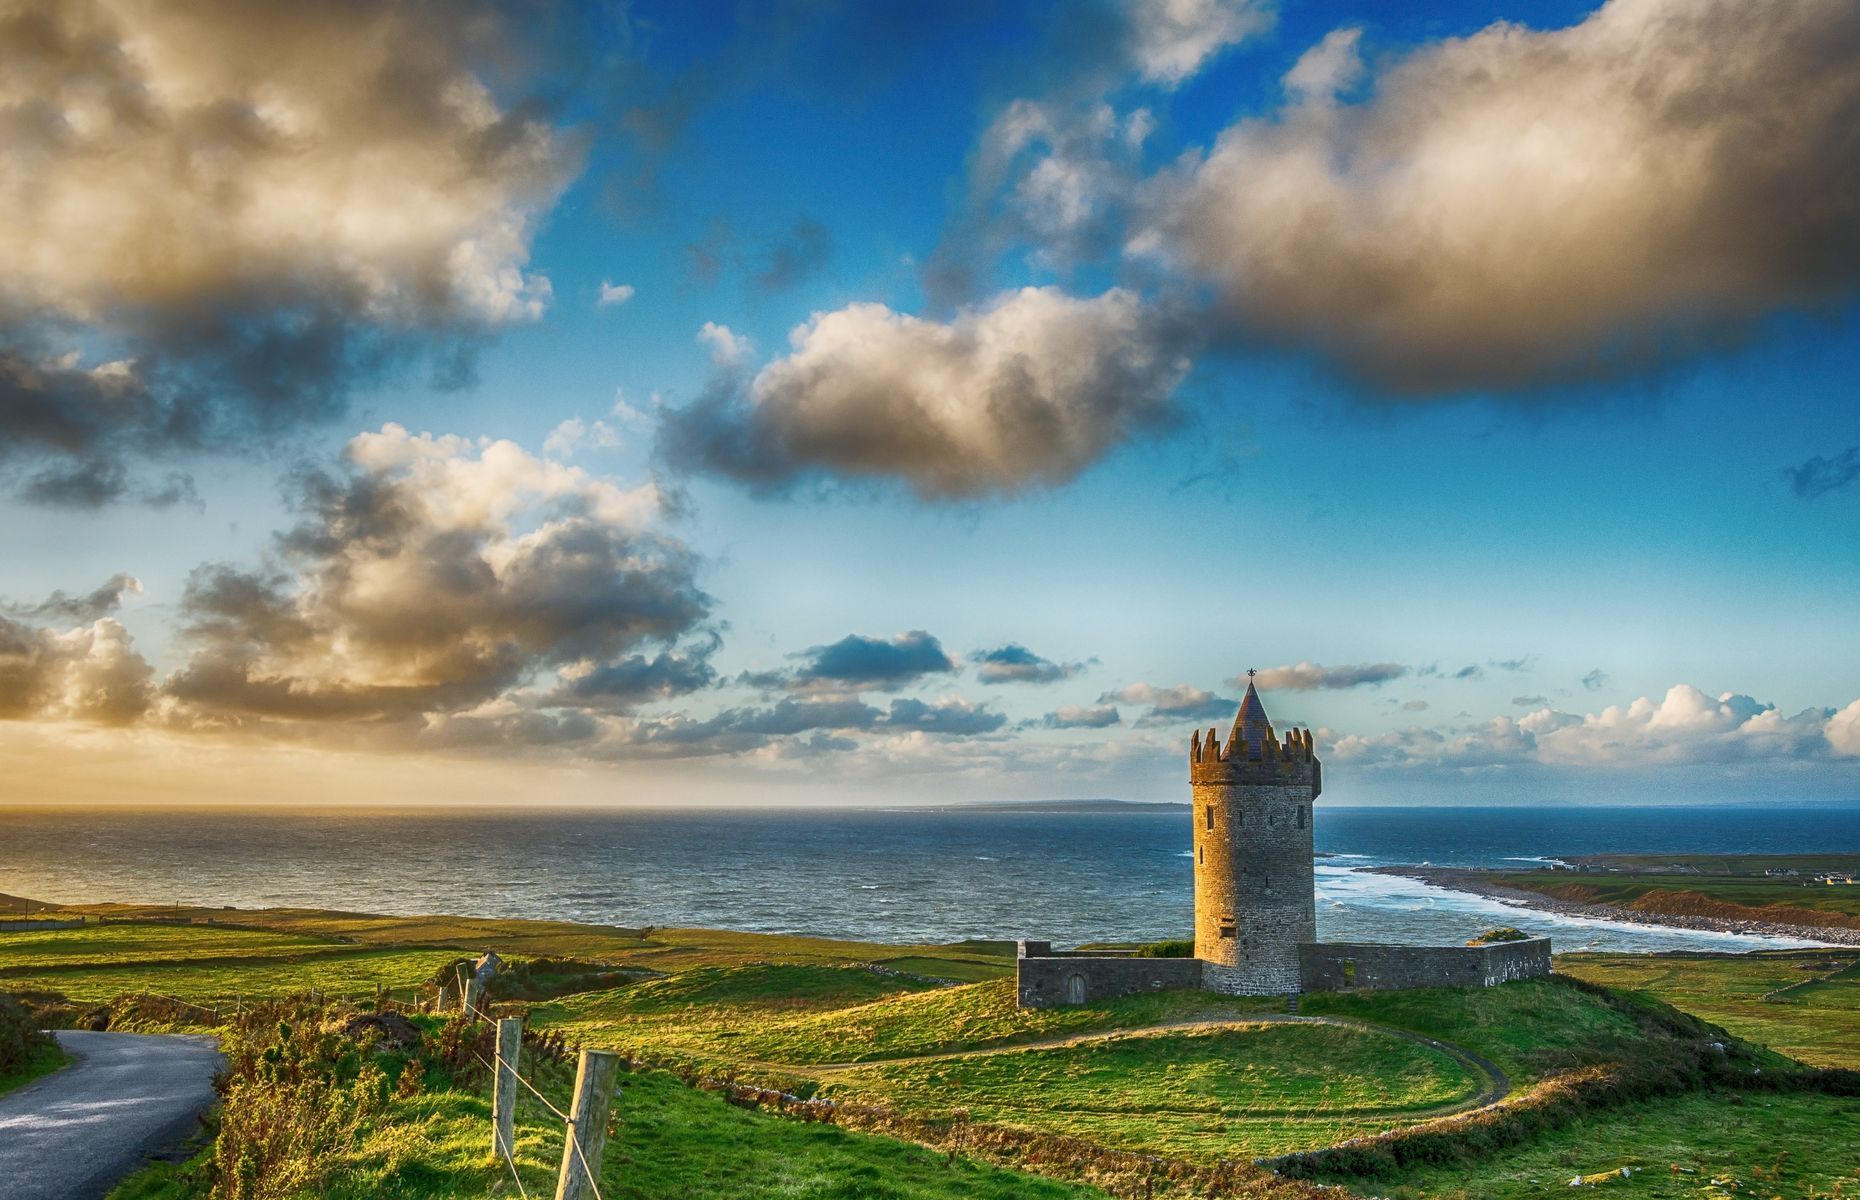 <p>Stretching across more than 2,500 kilometres (1,550 miles) of the country, the <a href="https://www.thewildatlanticway.com/" rel="noreferrer noopener">Wild Atlantic Way</a> connects Ireland’s west, north, and south coasts, from County Donegal to County Cork. Bordered by the ocean and towering cliffs, this sublime tourist route is also the longest defined coastal road in the world.</p>